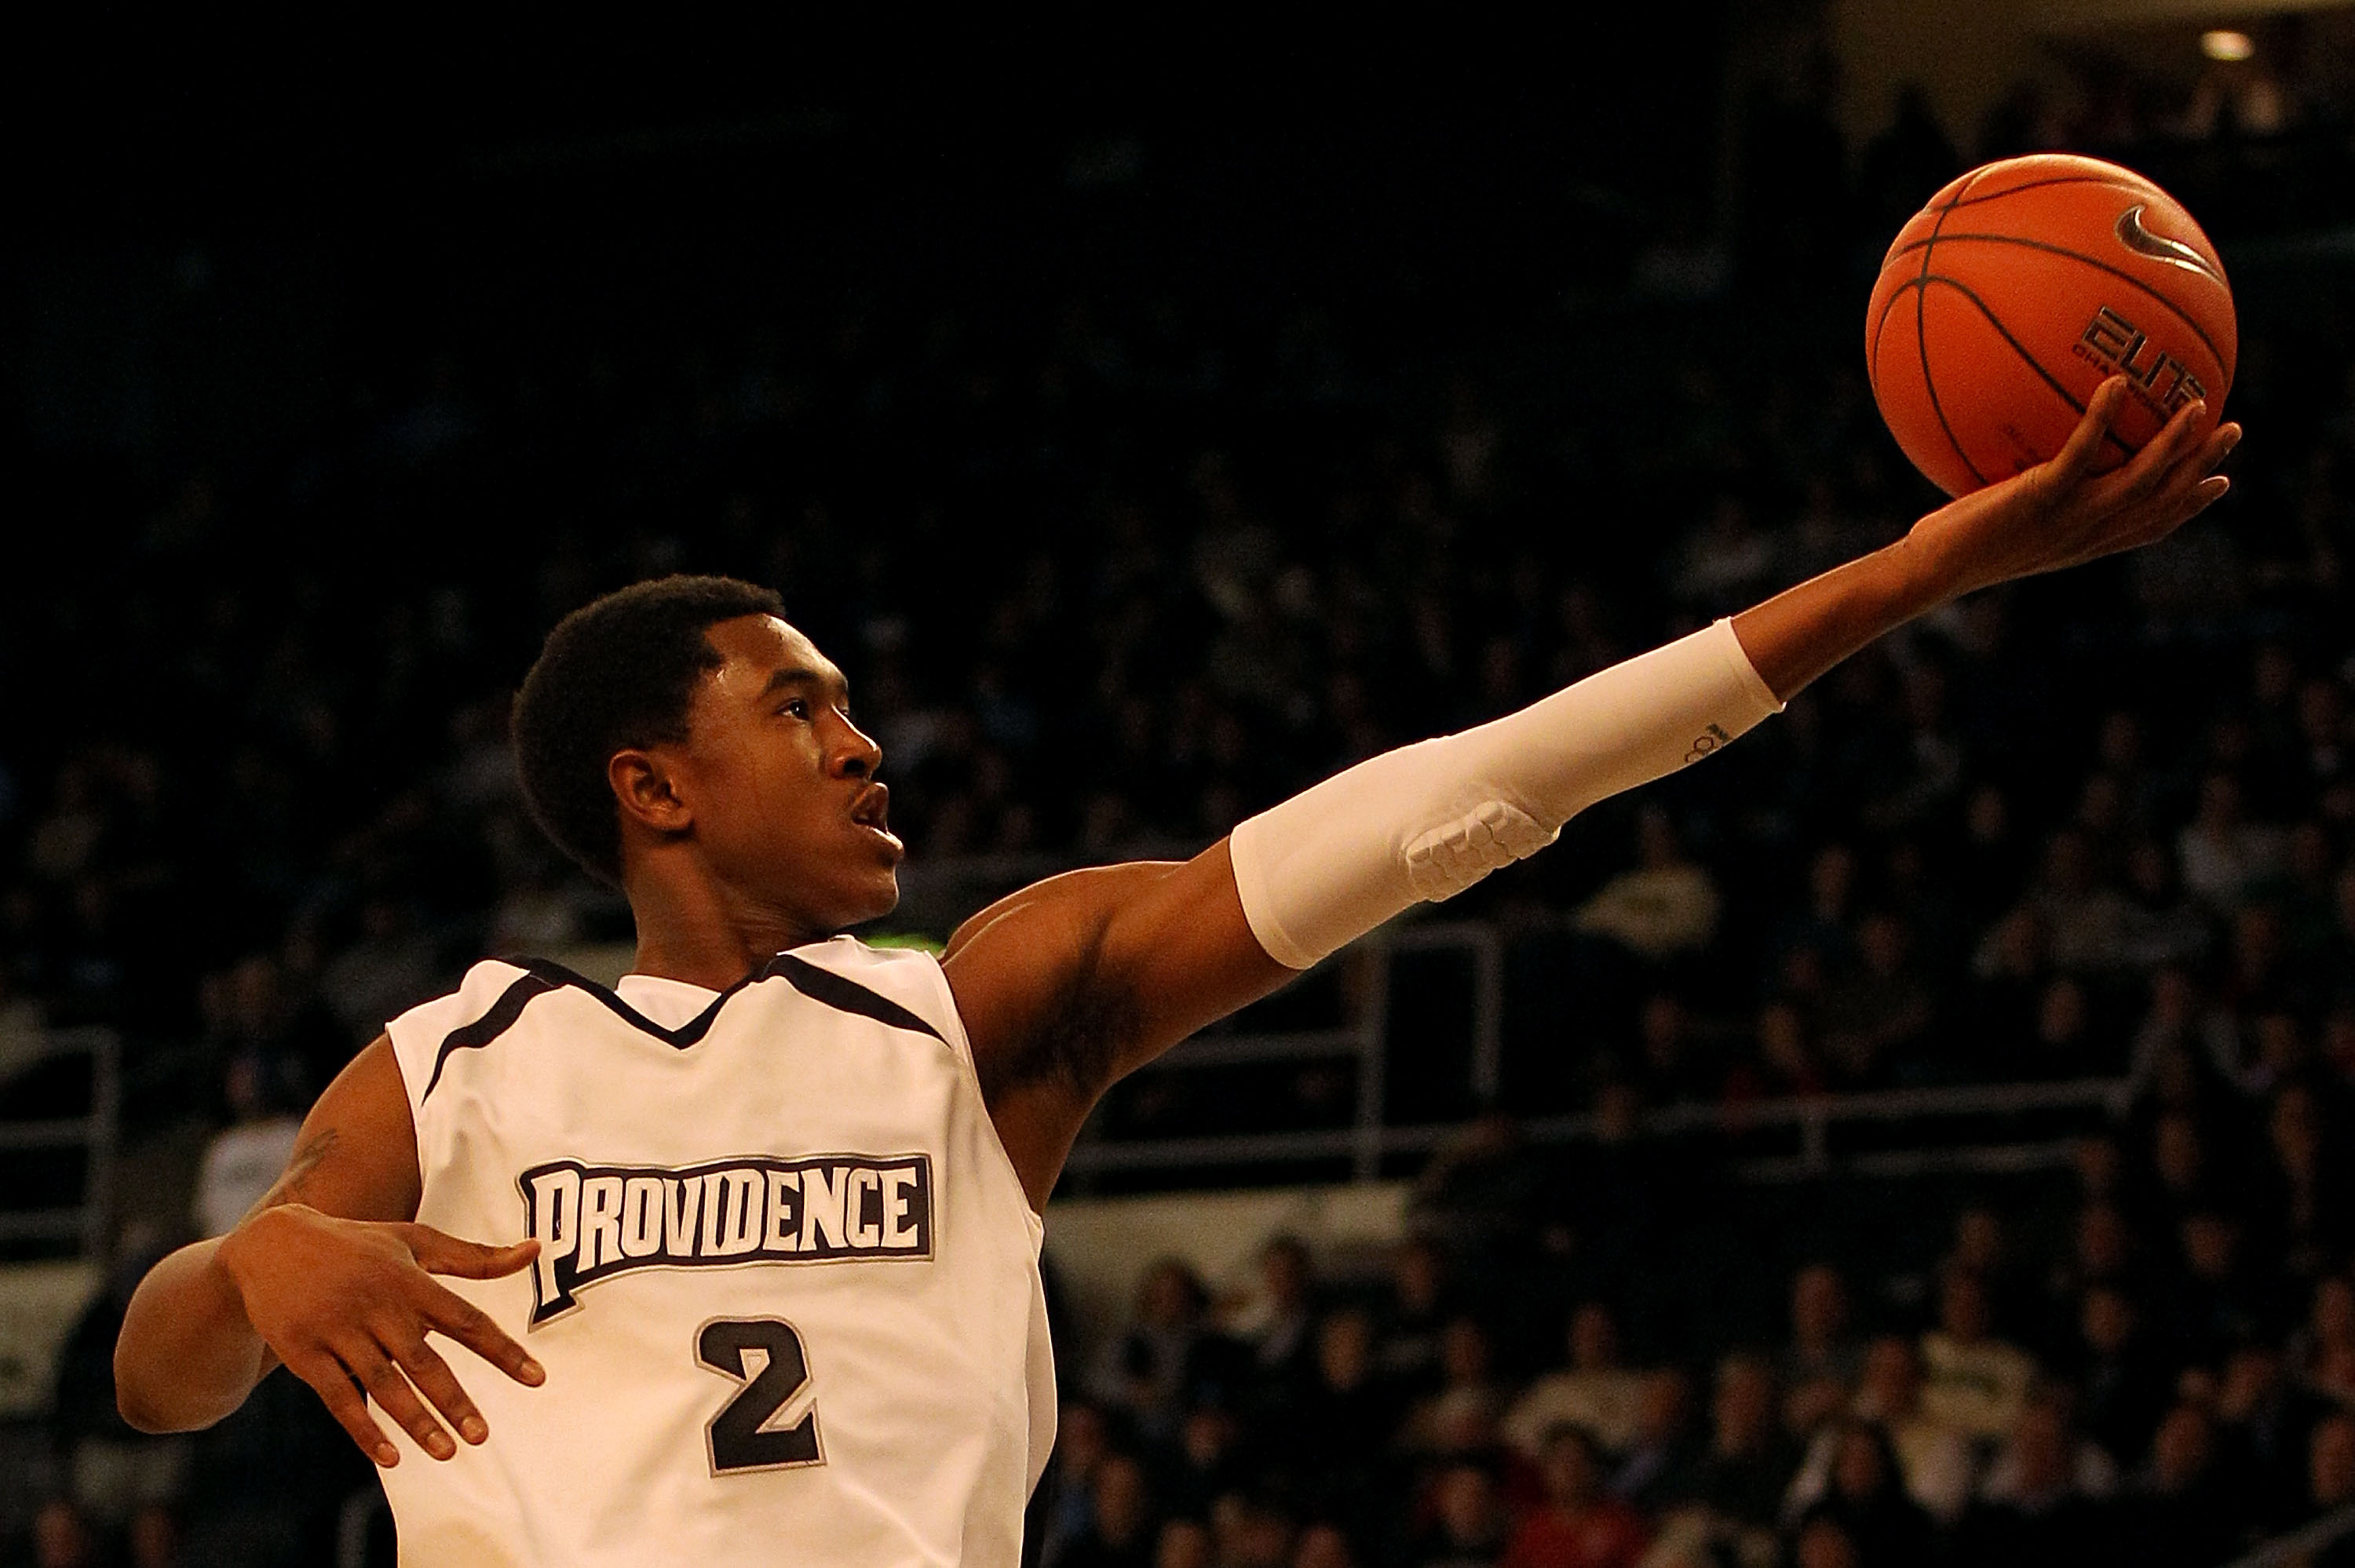 PROVIDENCE, RI - DECEMBER 04:  Marshon Brooks #2 of the Providence Friars drives for a shot attempt against the Rhode Island Rams at the Dunkin' Donuts Center on December 4, 2010 in Providence, Rhode Island.  (Photo by Chris Chambers/Getty Images)